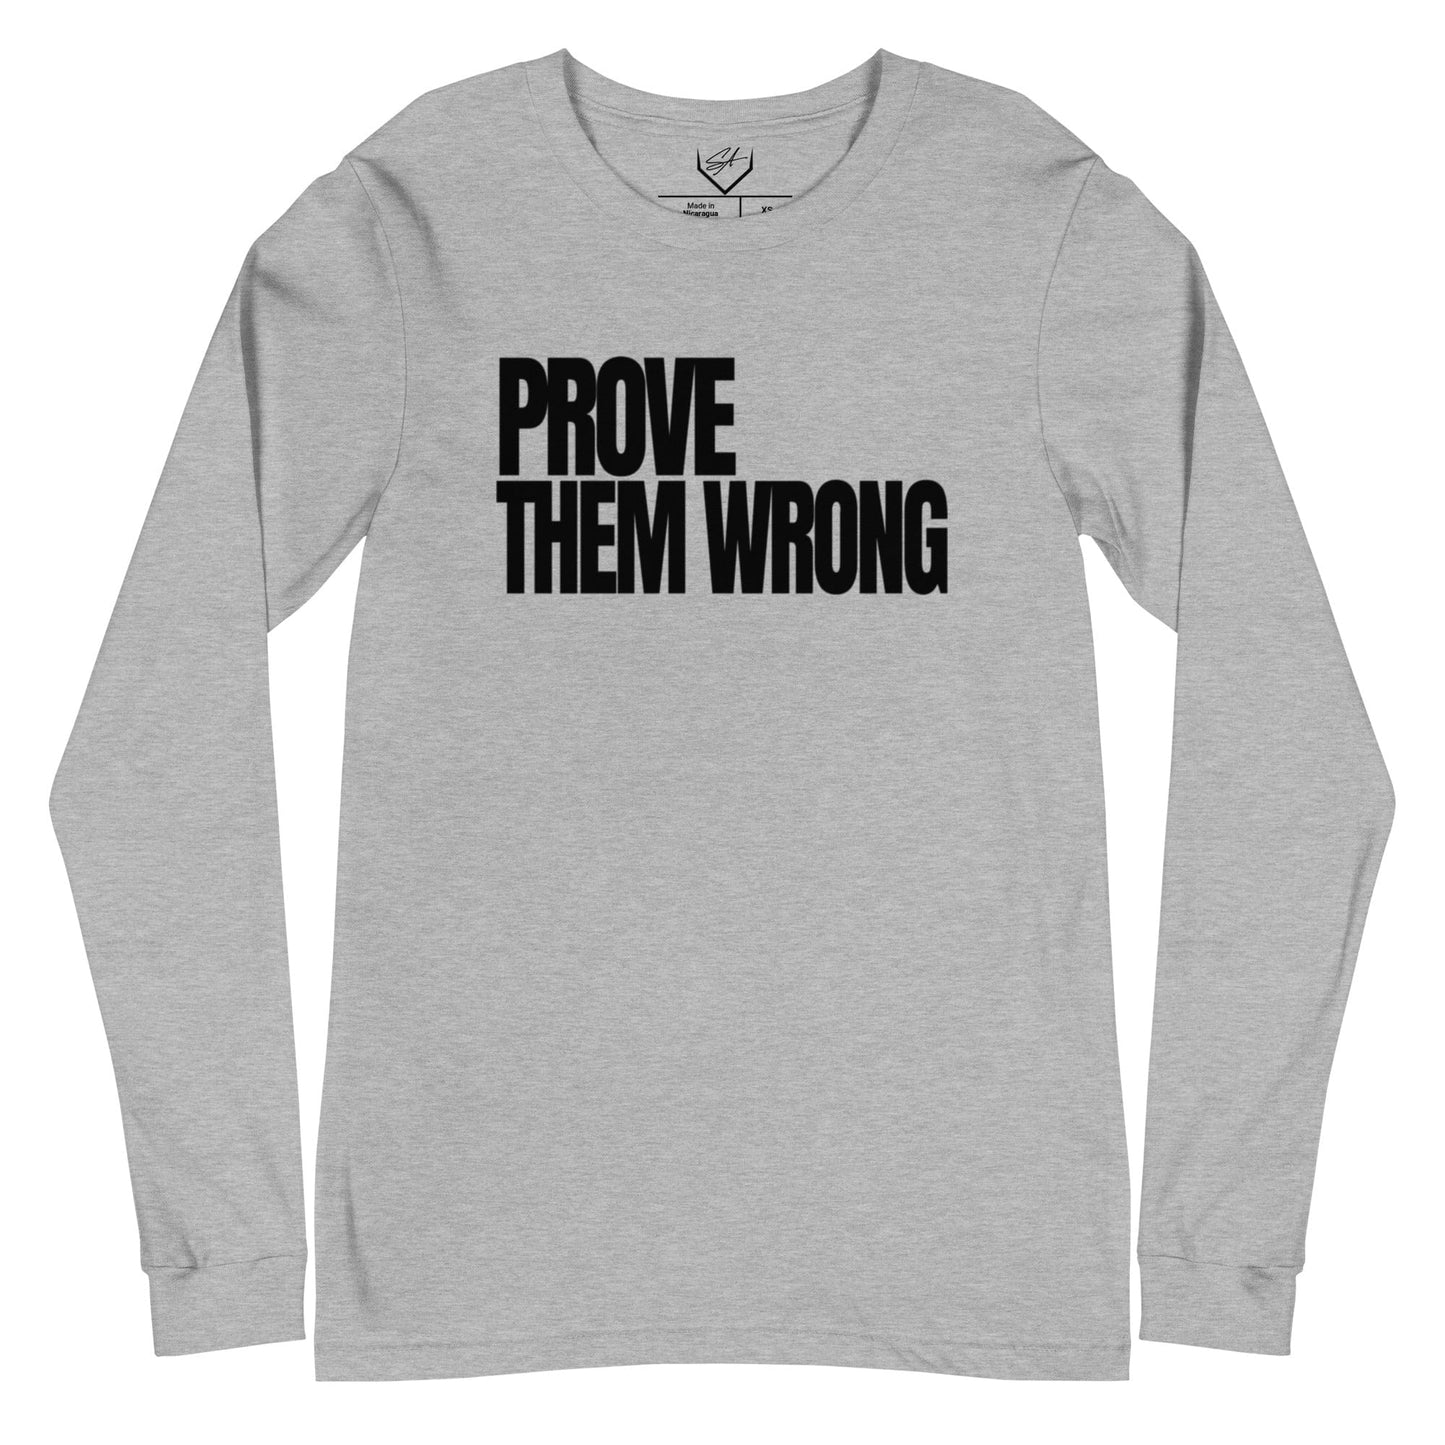 Prove Them Wrong - Adult Long Sleeve